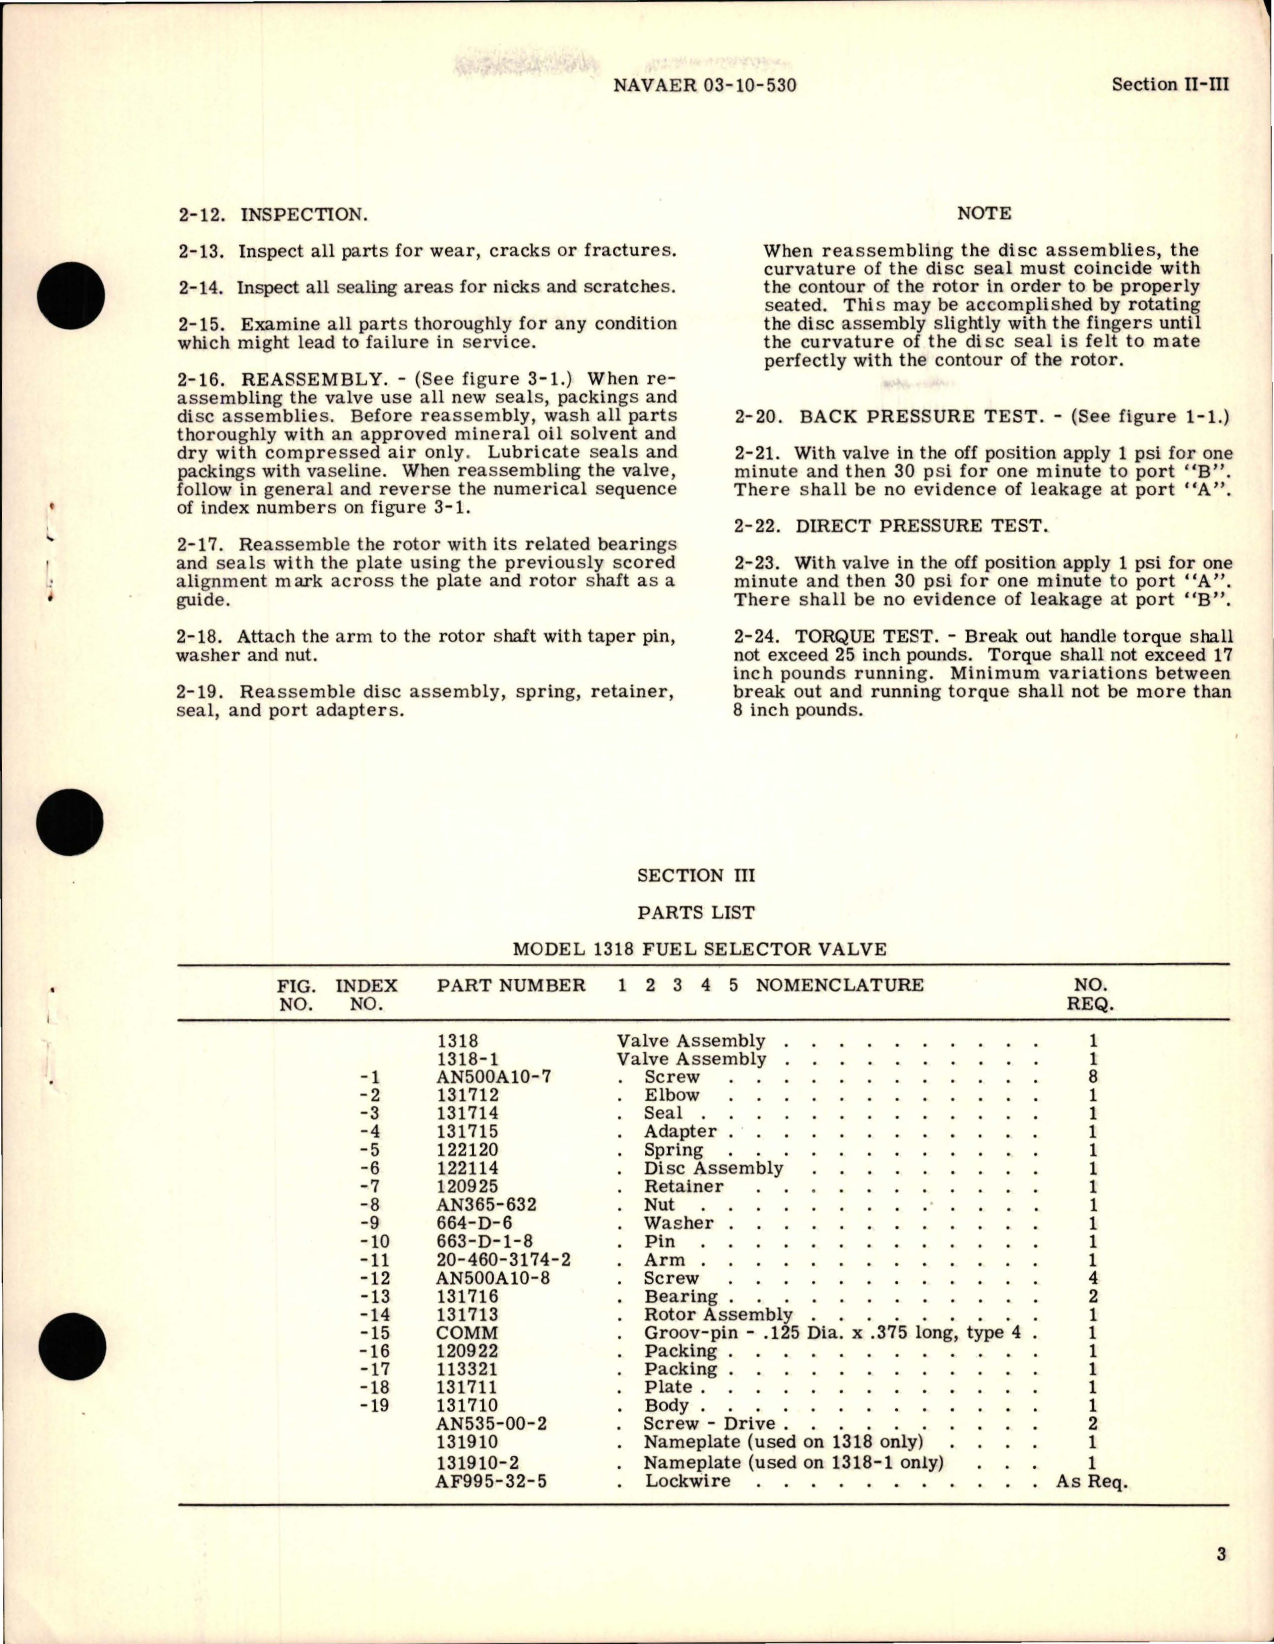 Sample page 5 from AirCorps Library document: Operation, Service and Overhaul Instructions with Parts Catalog for Fuel Selector Valves - Models 1318 and 1318-1 